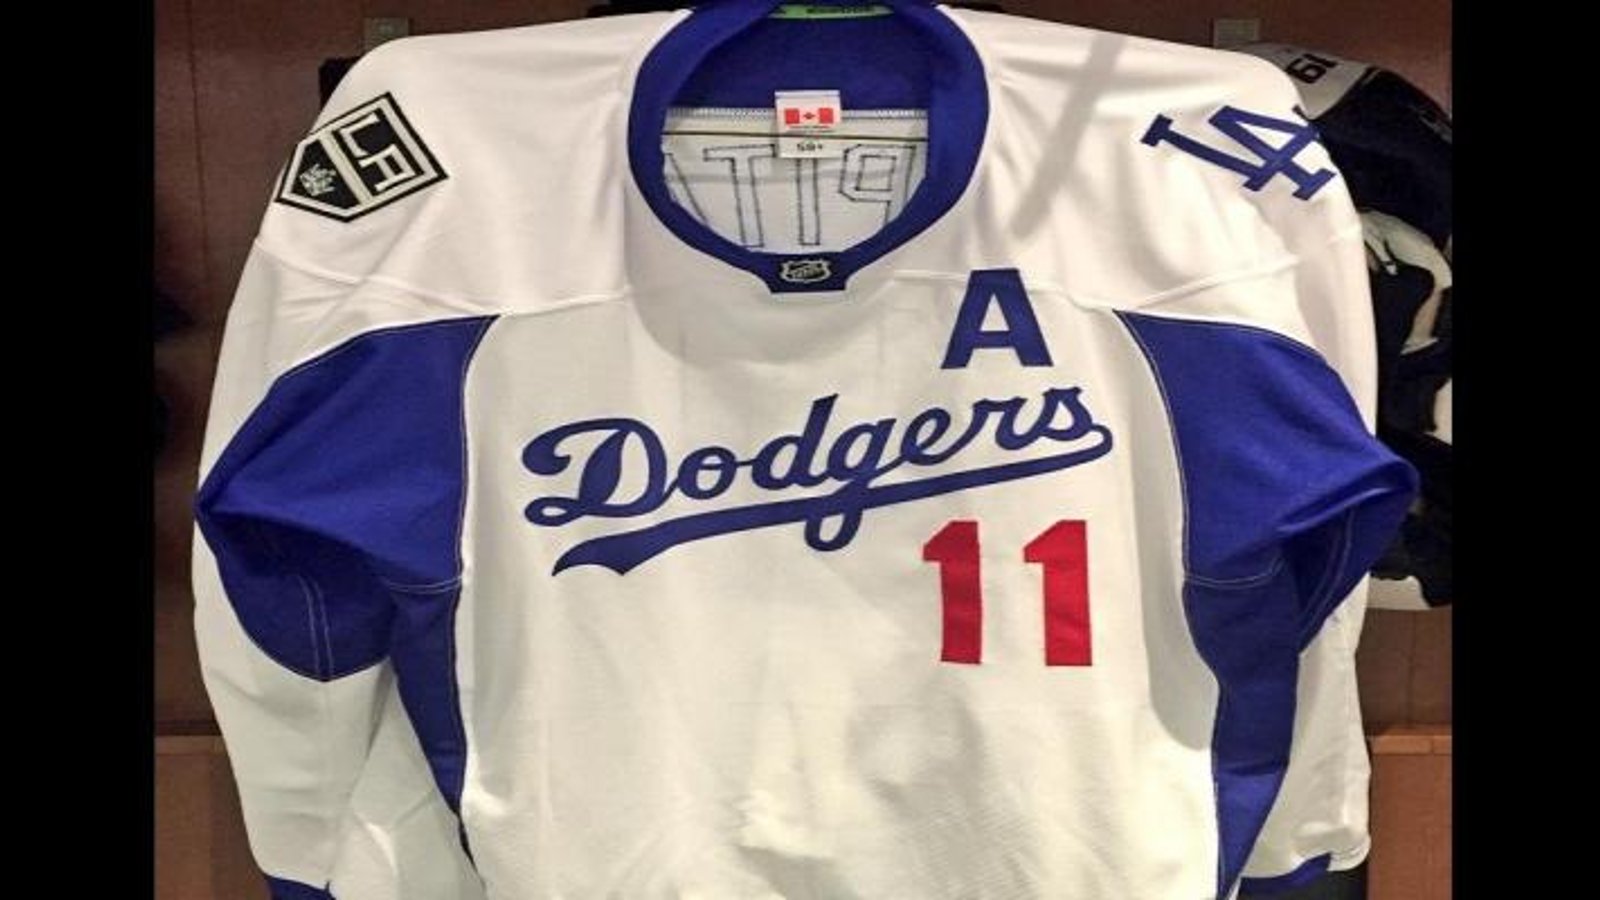 Kings showed the Dodgers some love last night.